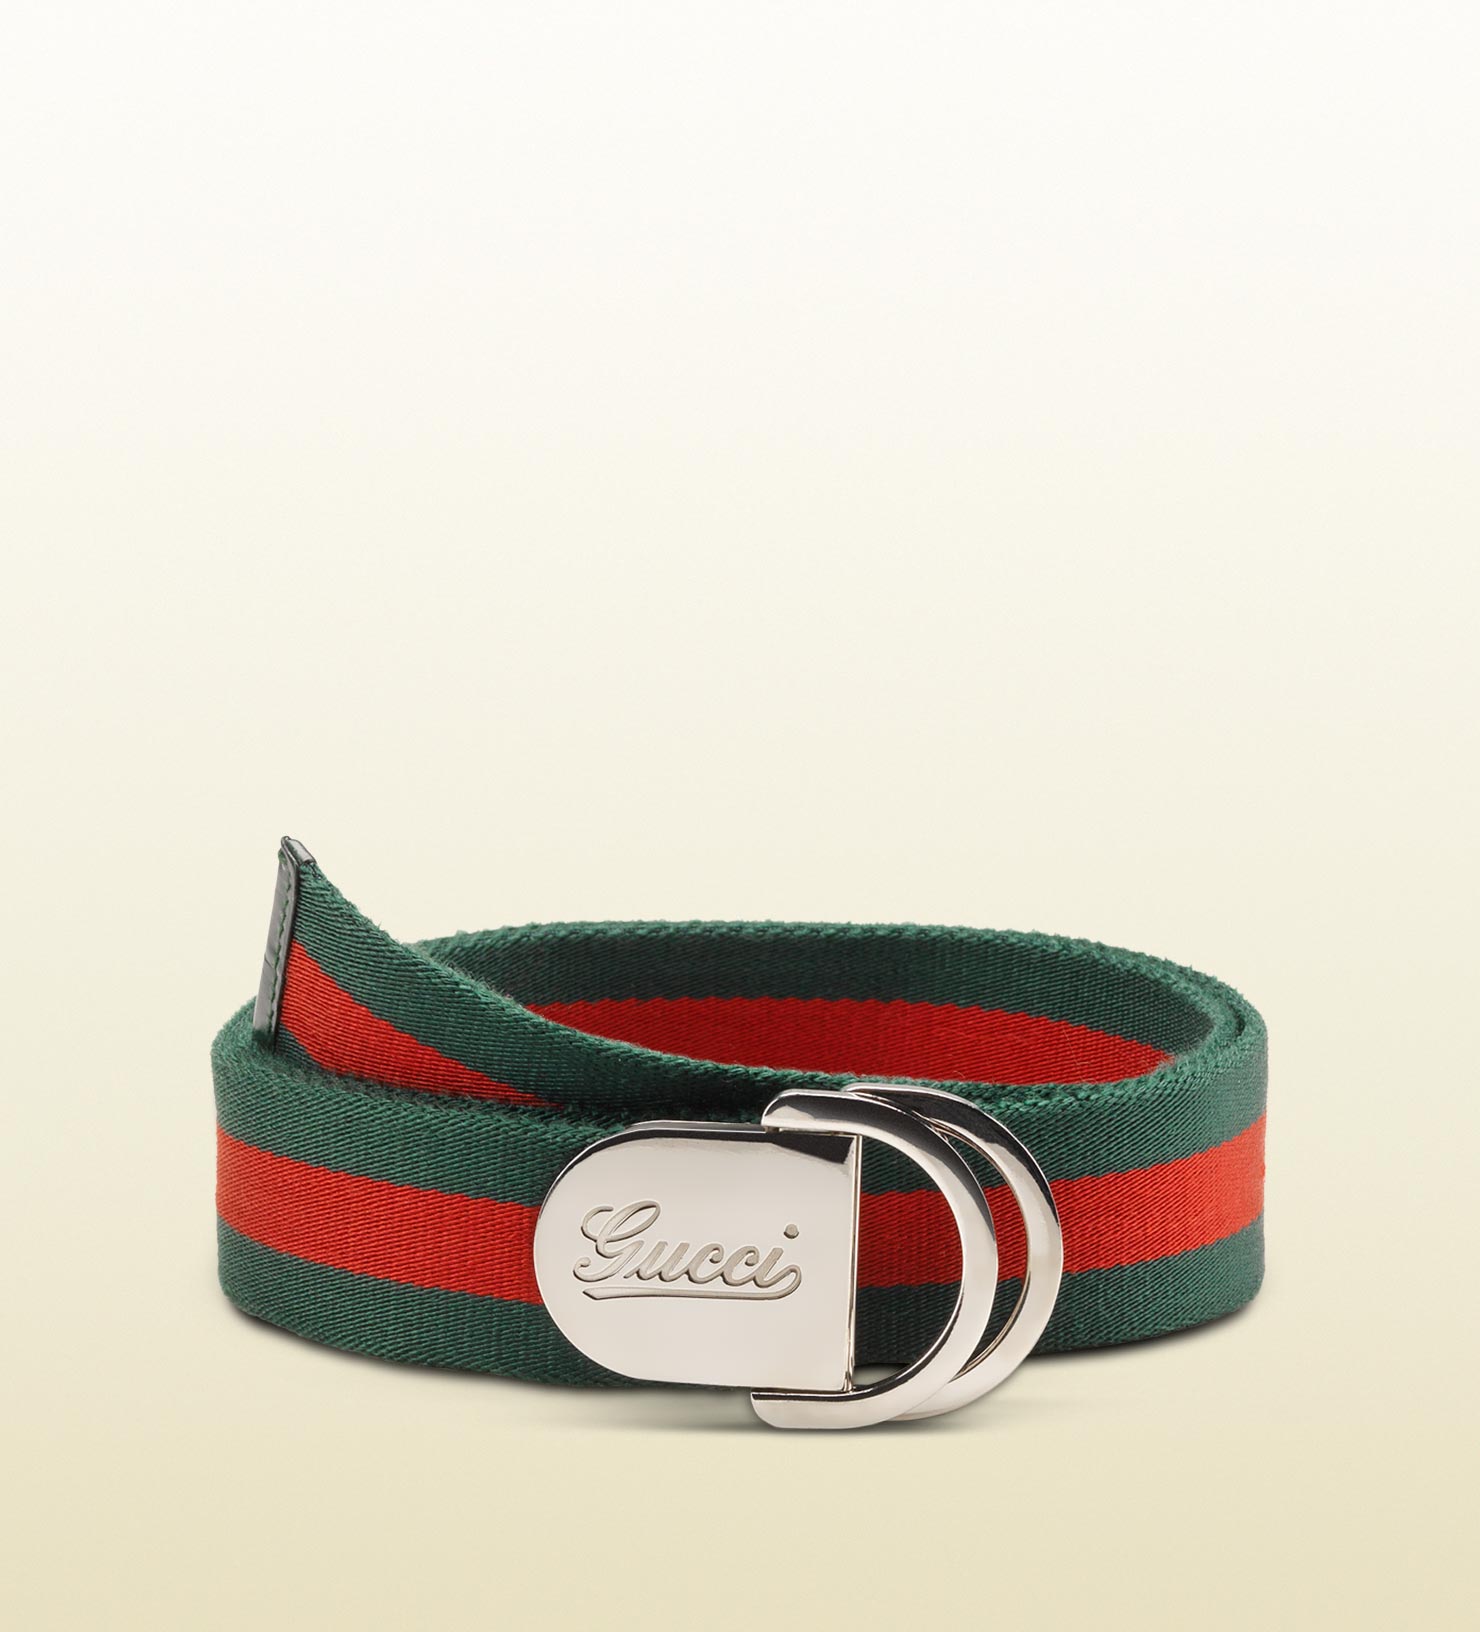 Lyst - Gucci Web Belt With Signature Buckle in Green for Men